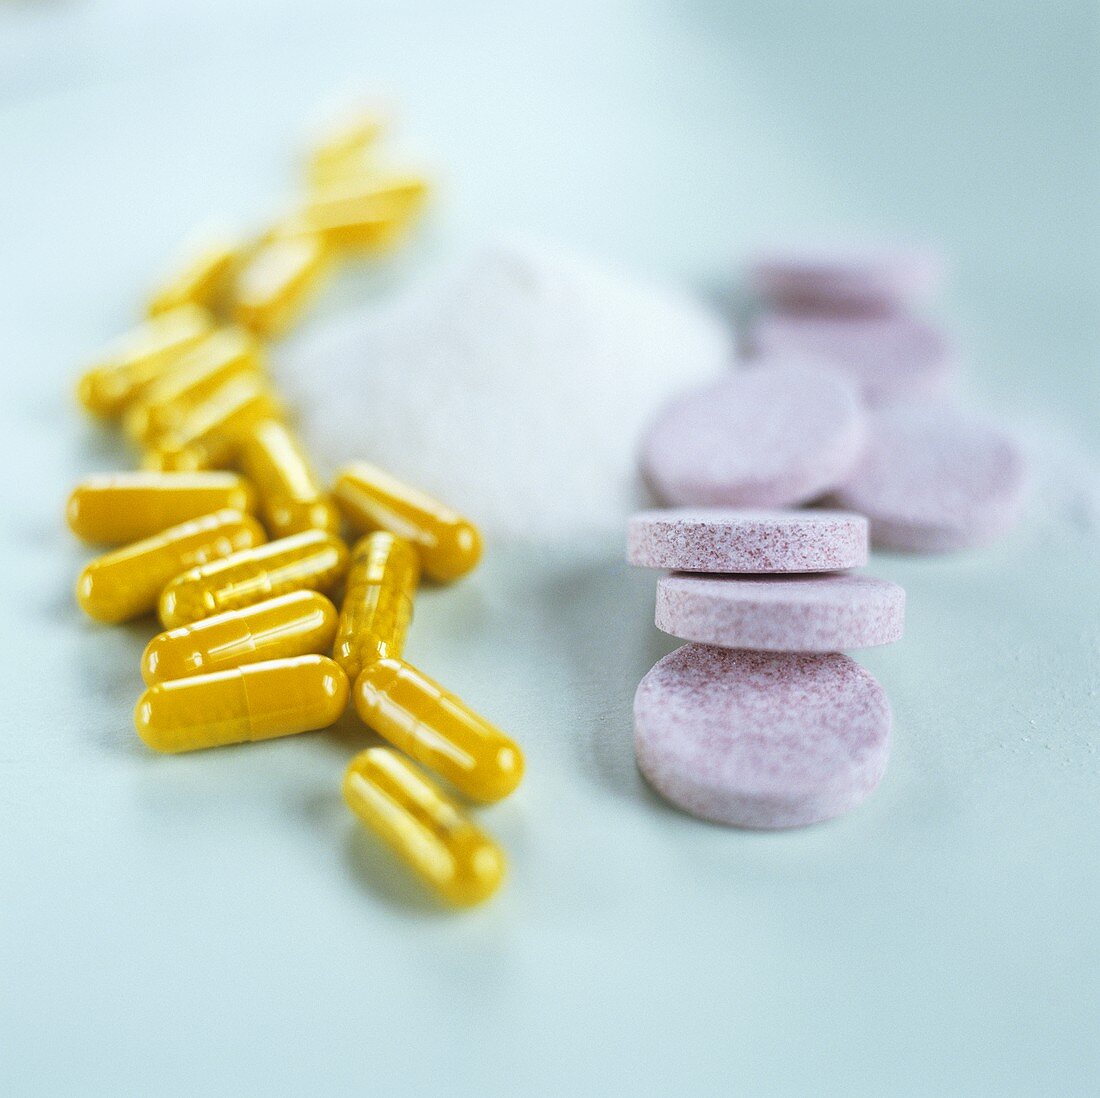 Vitamins in form of capsules, powder & effervescent tablets